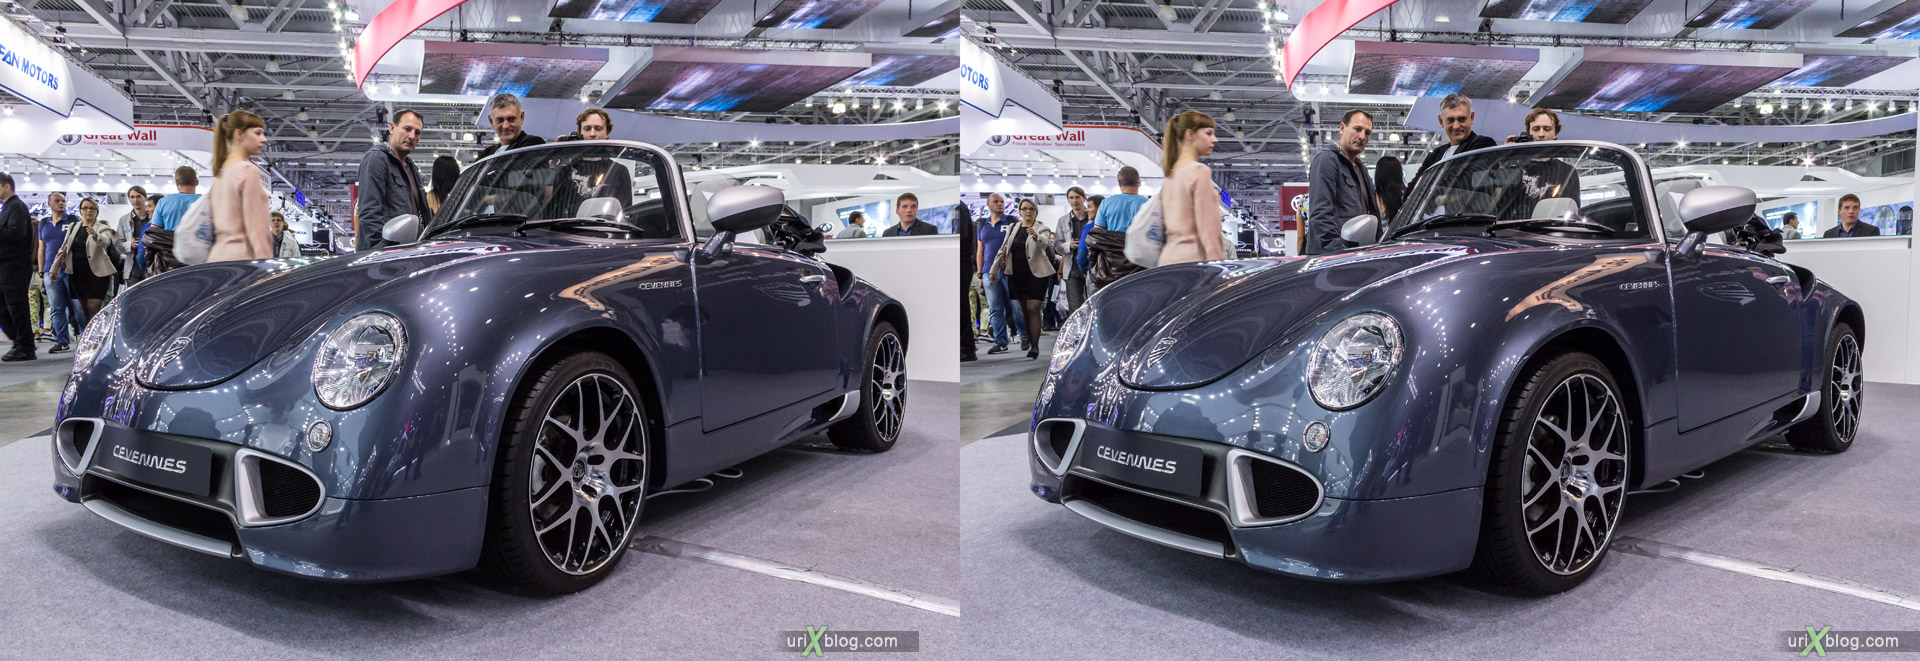 2014, PGO Cevennes, Moscow International Automobile Salon, MIAS, Crocus Expo, Moscow, Russia, augest, 3D, stereo pair, cross-eyed, crossview, cross view stereo pair, stereoscopic